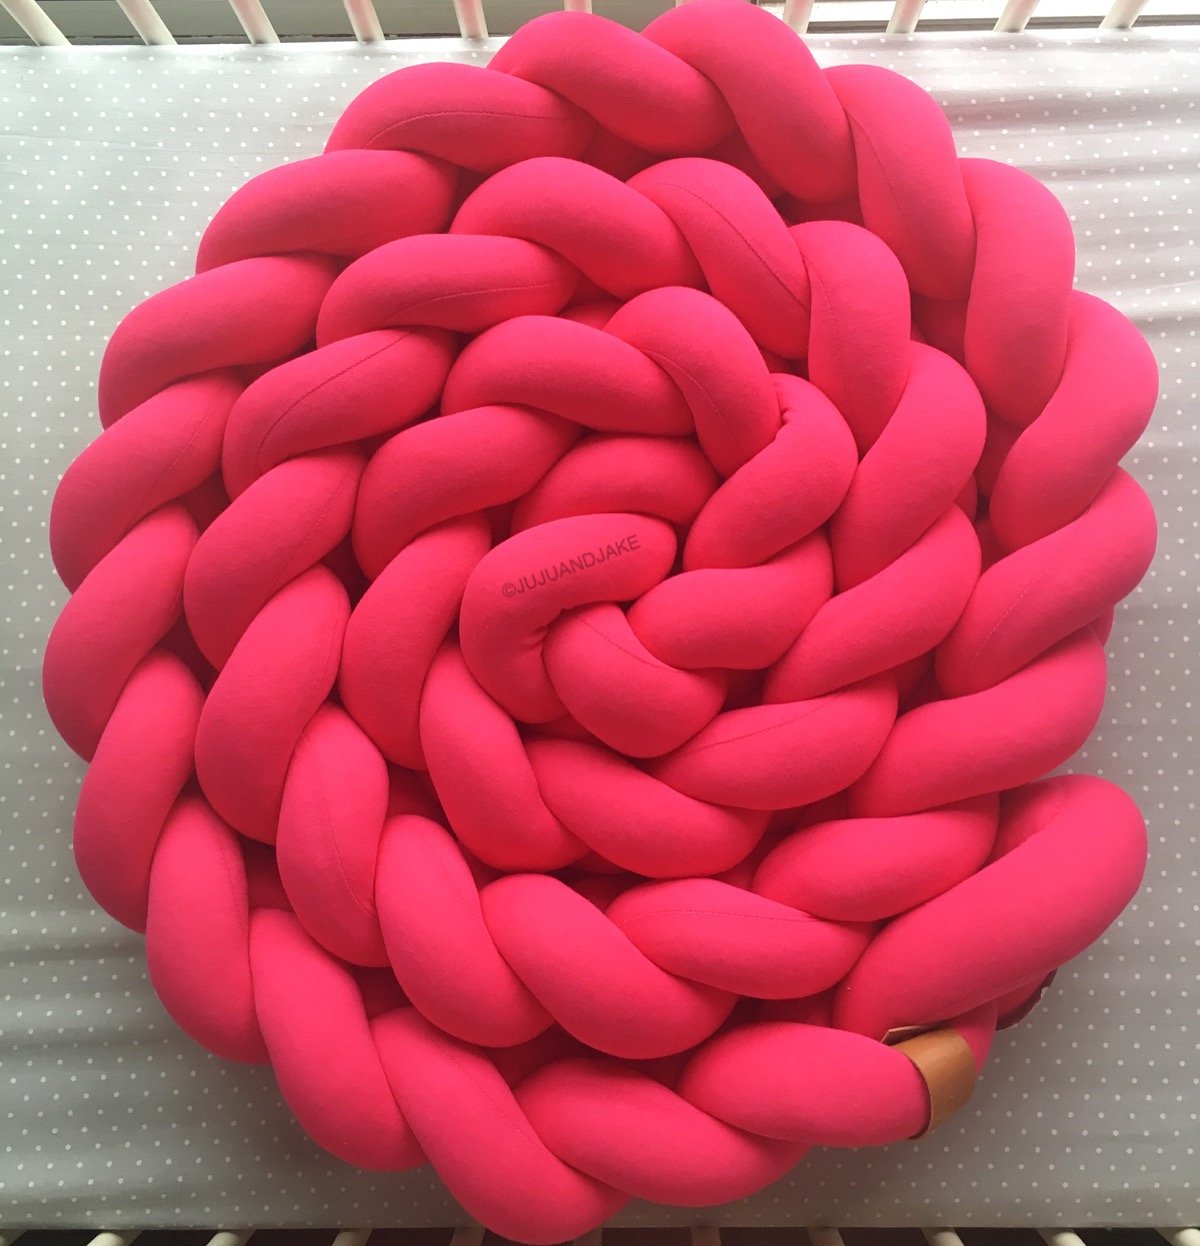 Raspberry | Braided Crib Bumper / Bed Bolster - Partial Length - See more Knot Pillows & Cushions at JujuAndJake.com